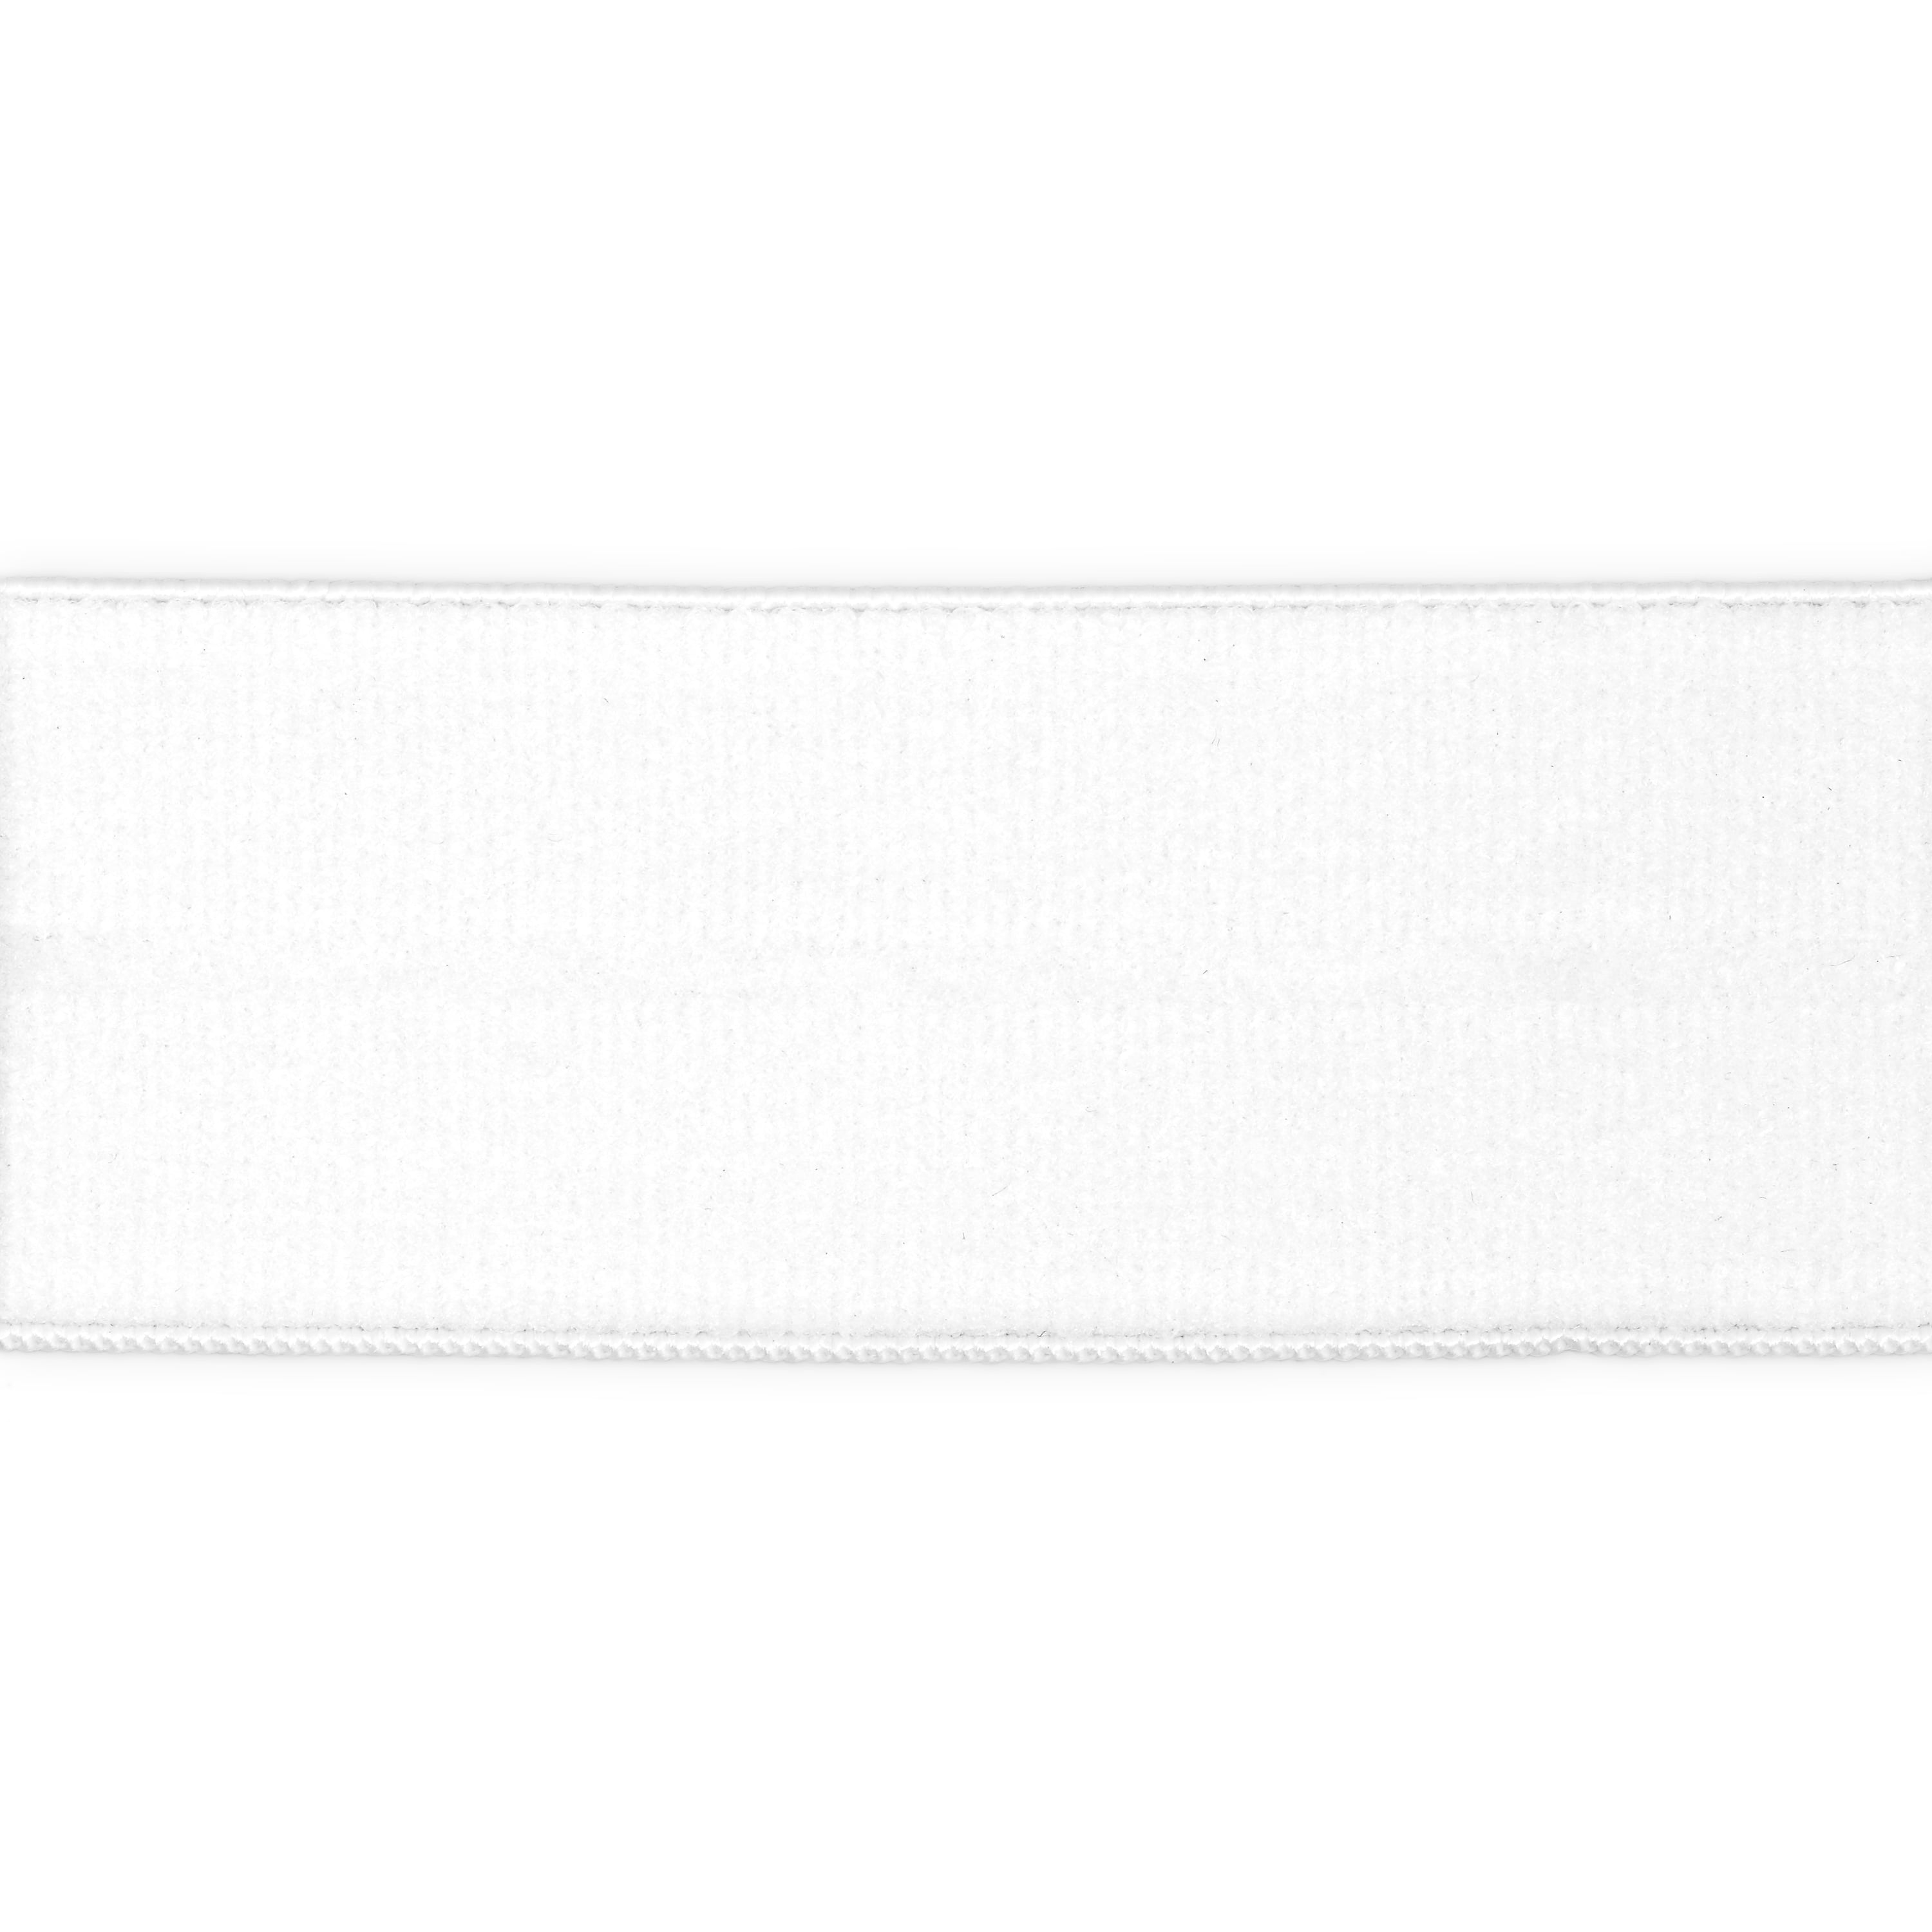 MJTrends: White 1-inch fold-over elastic